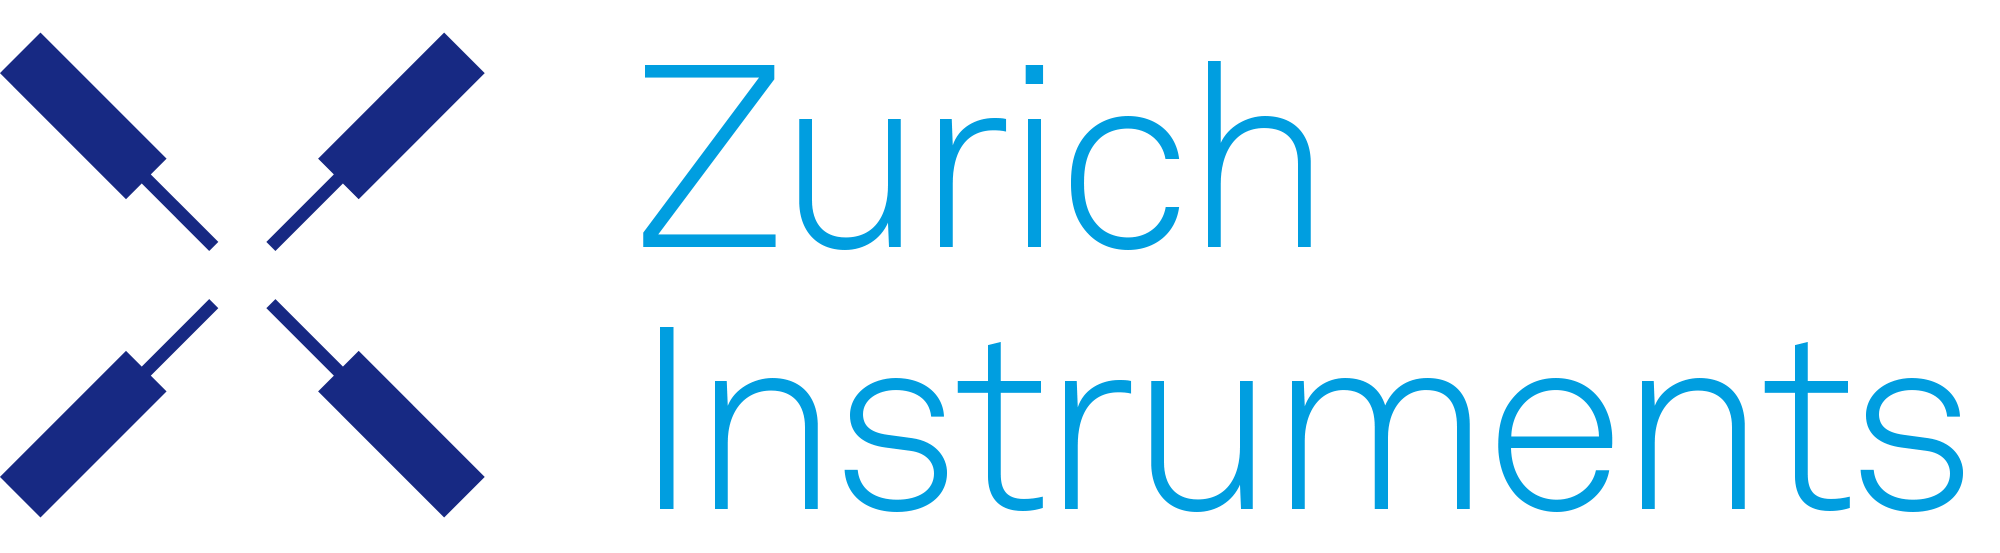 Logo of the company: zurich-instruments